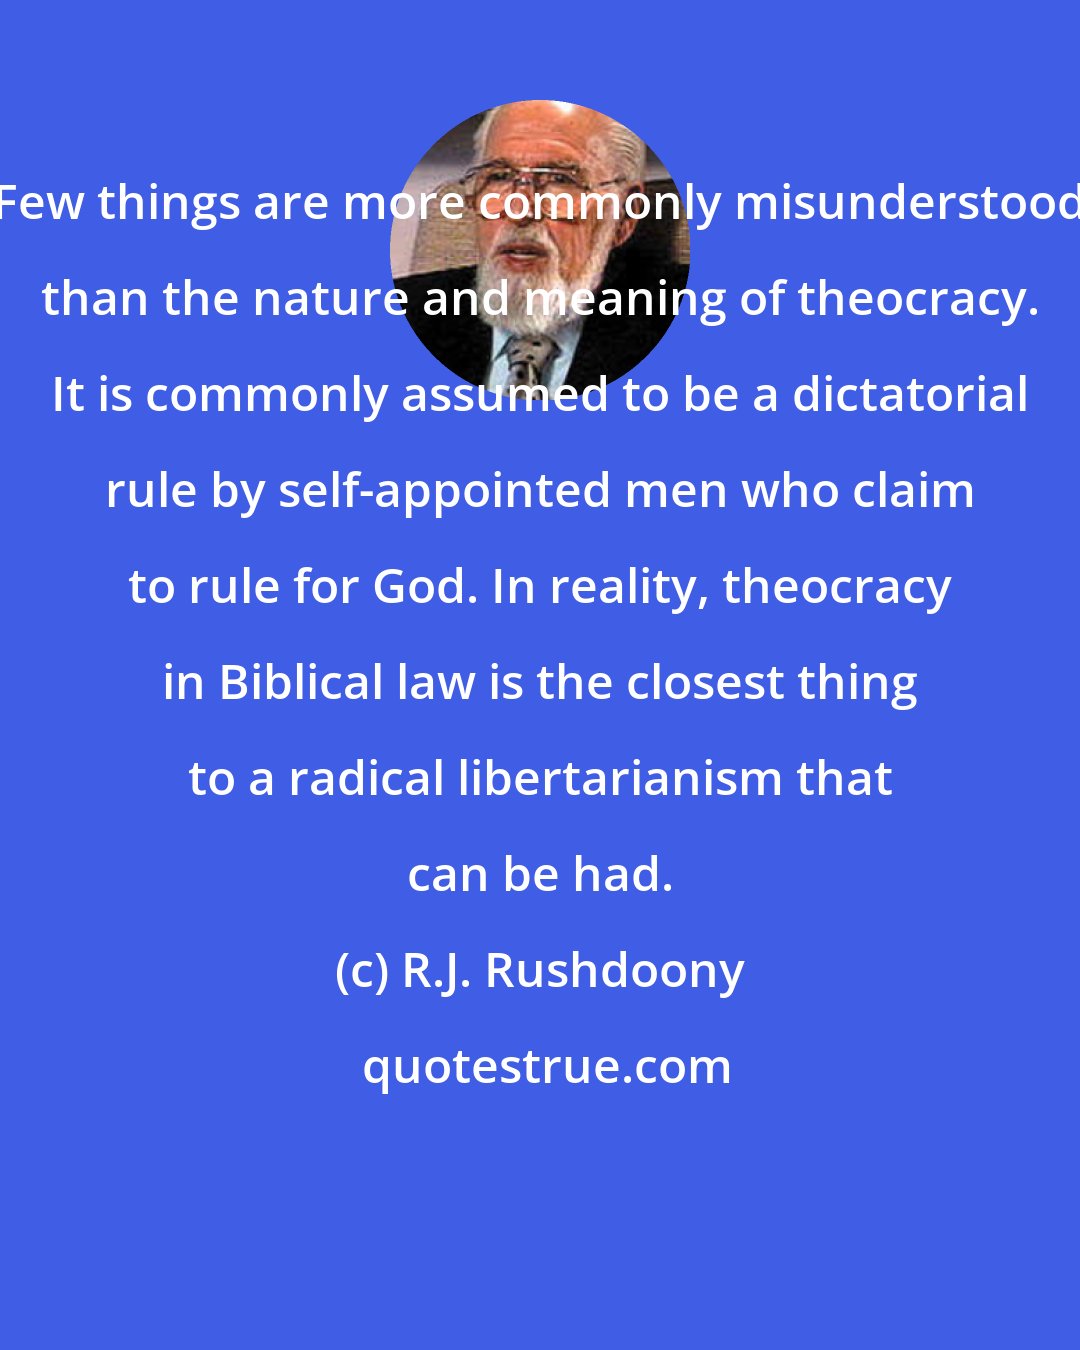 R.J. Rushdoony: Few things are more commonly misunderstood than the nature and meaning of theocracy. It is commonly assumed to be a dictatorial rule by self-appointed men who claim to rule for God. In reality, theocracy in Biblical law is the closest thing to a radical libertarianism that can be had.